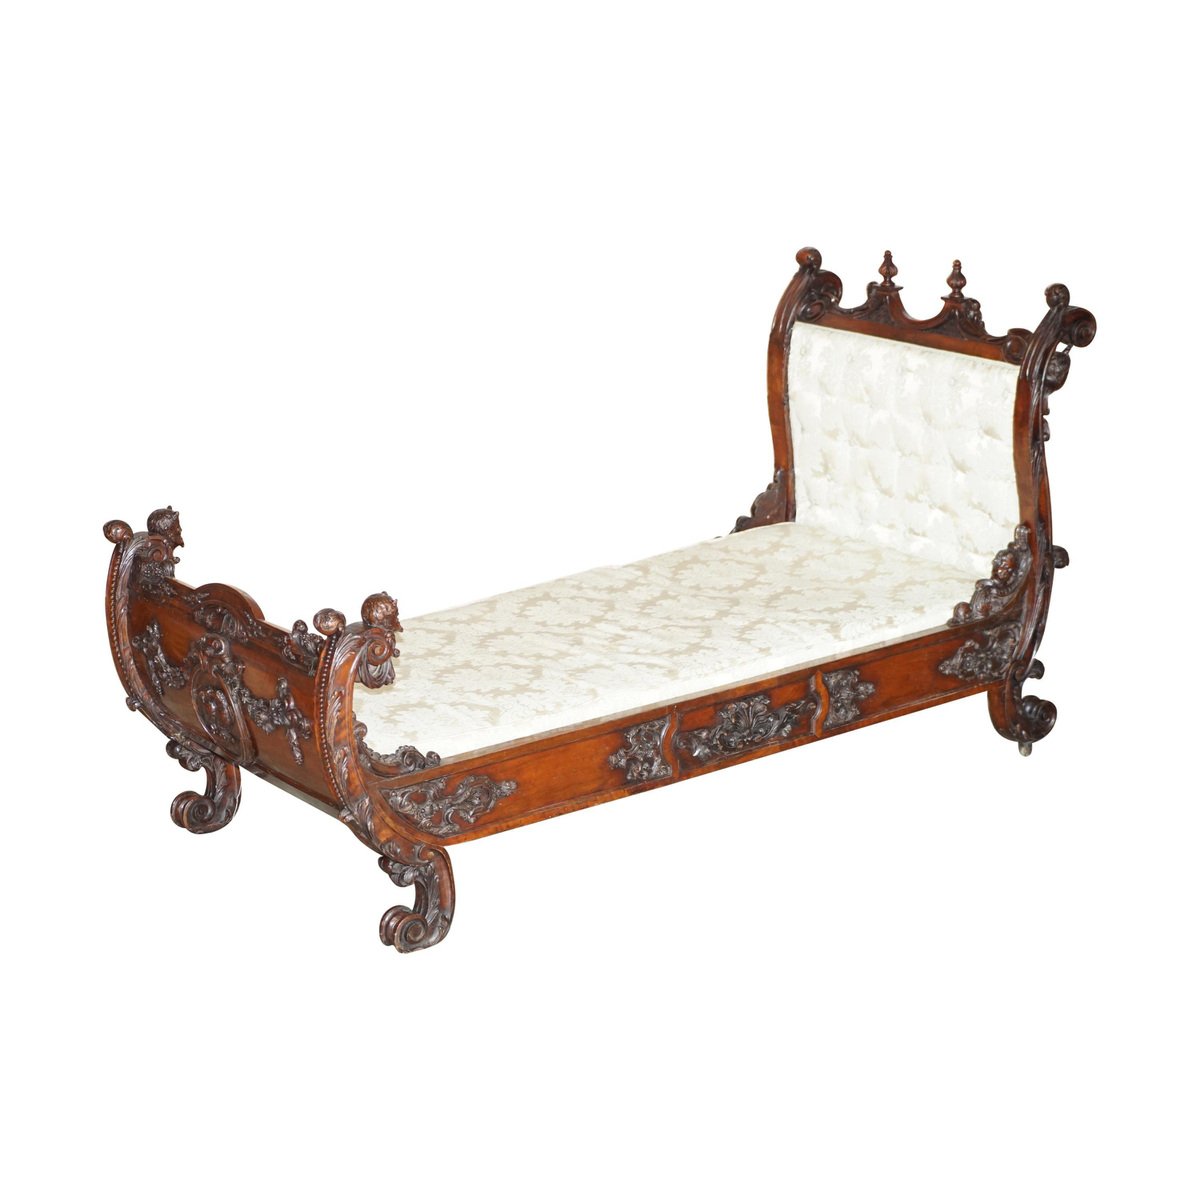 19th century italian hand carved walnut daybed with puttis GZP-1006400